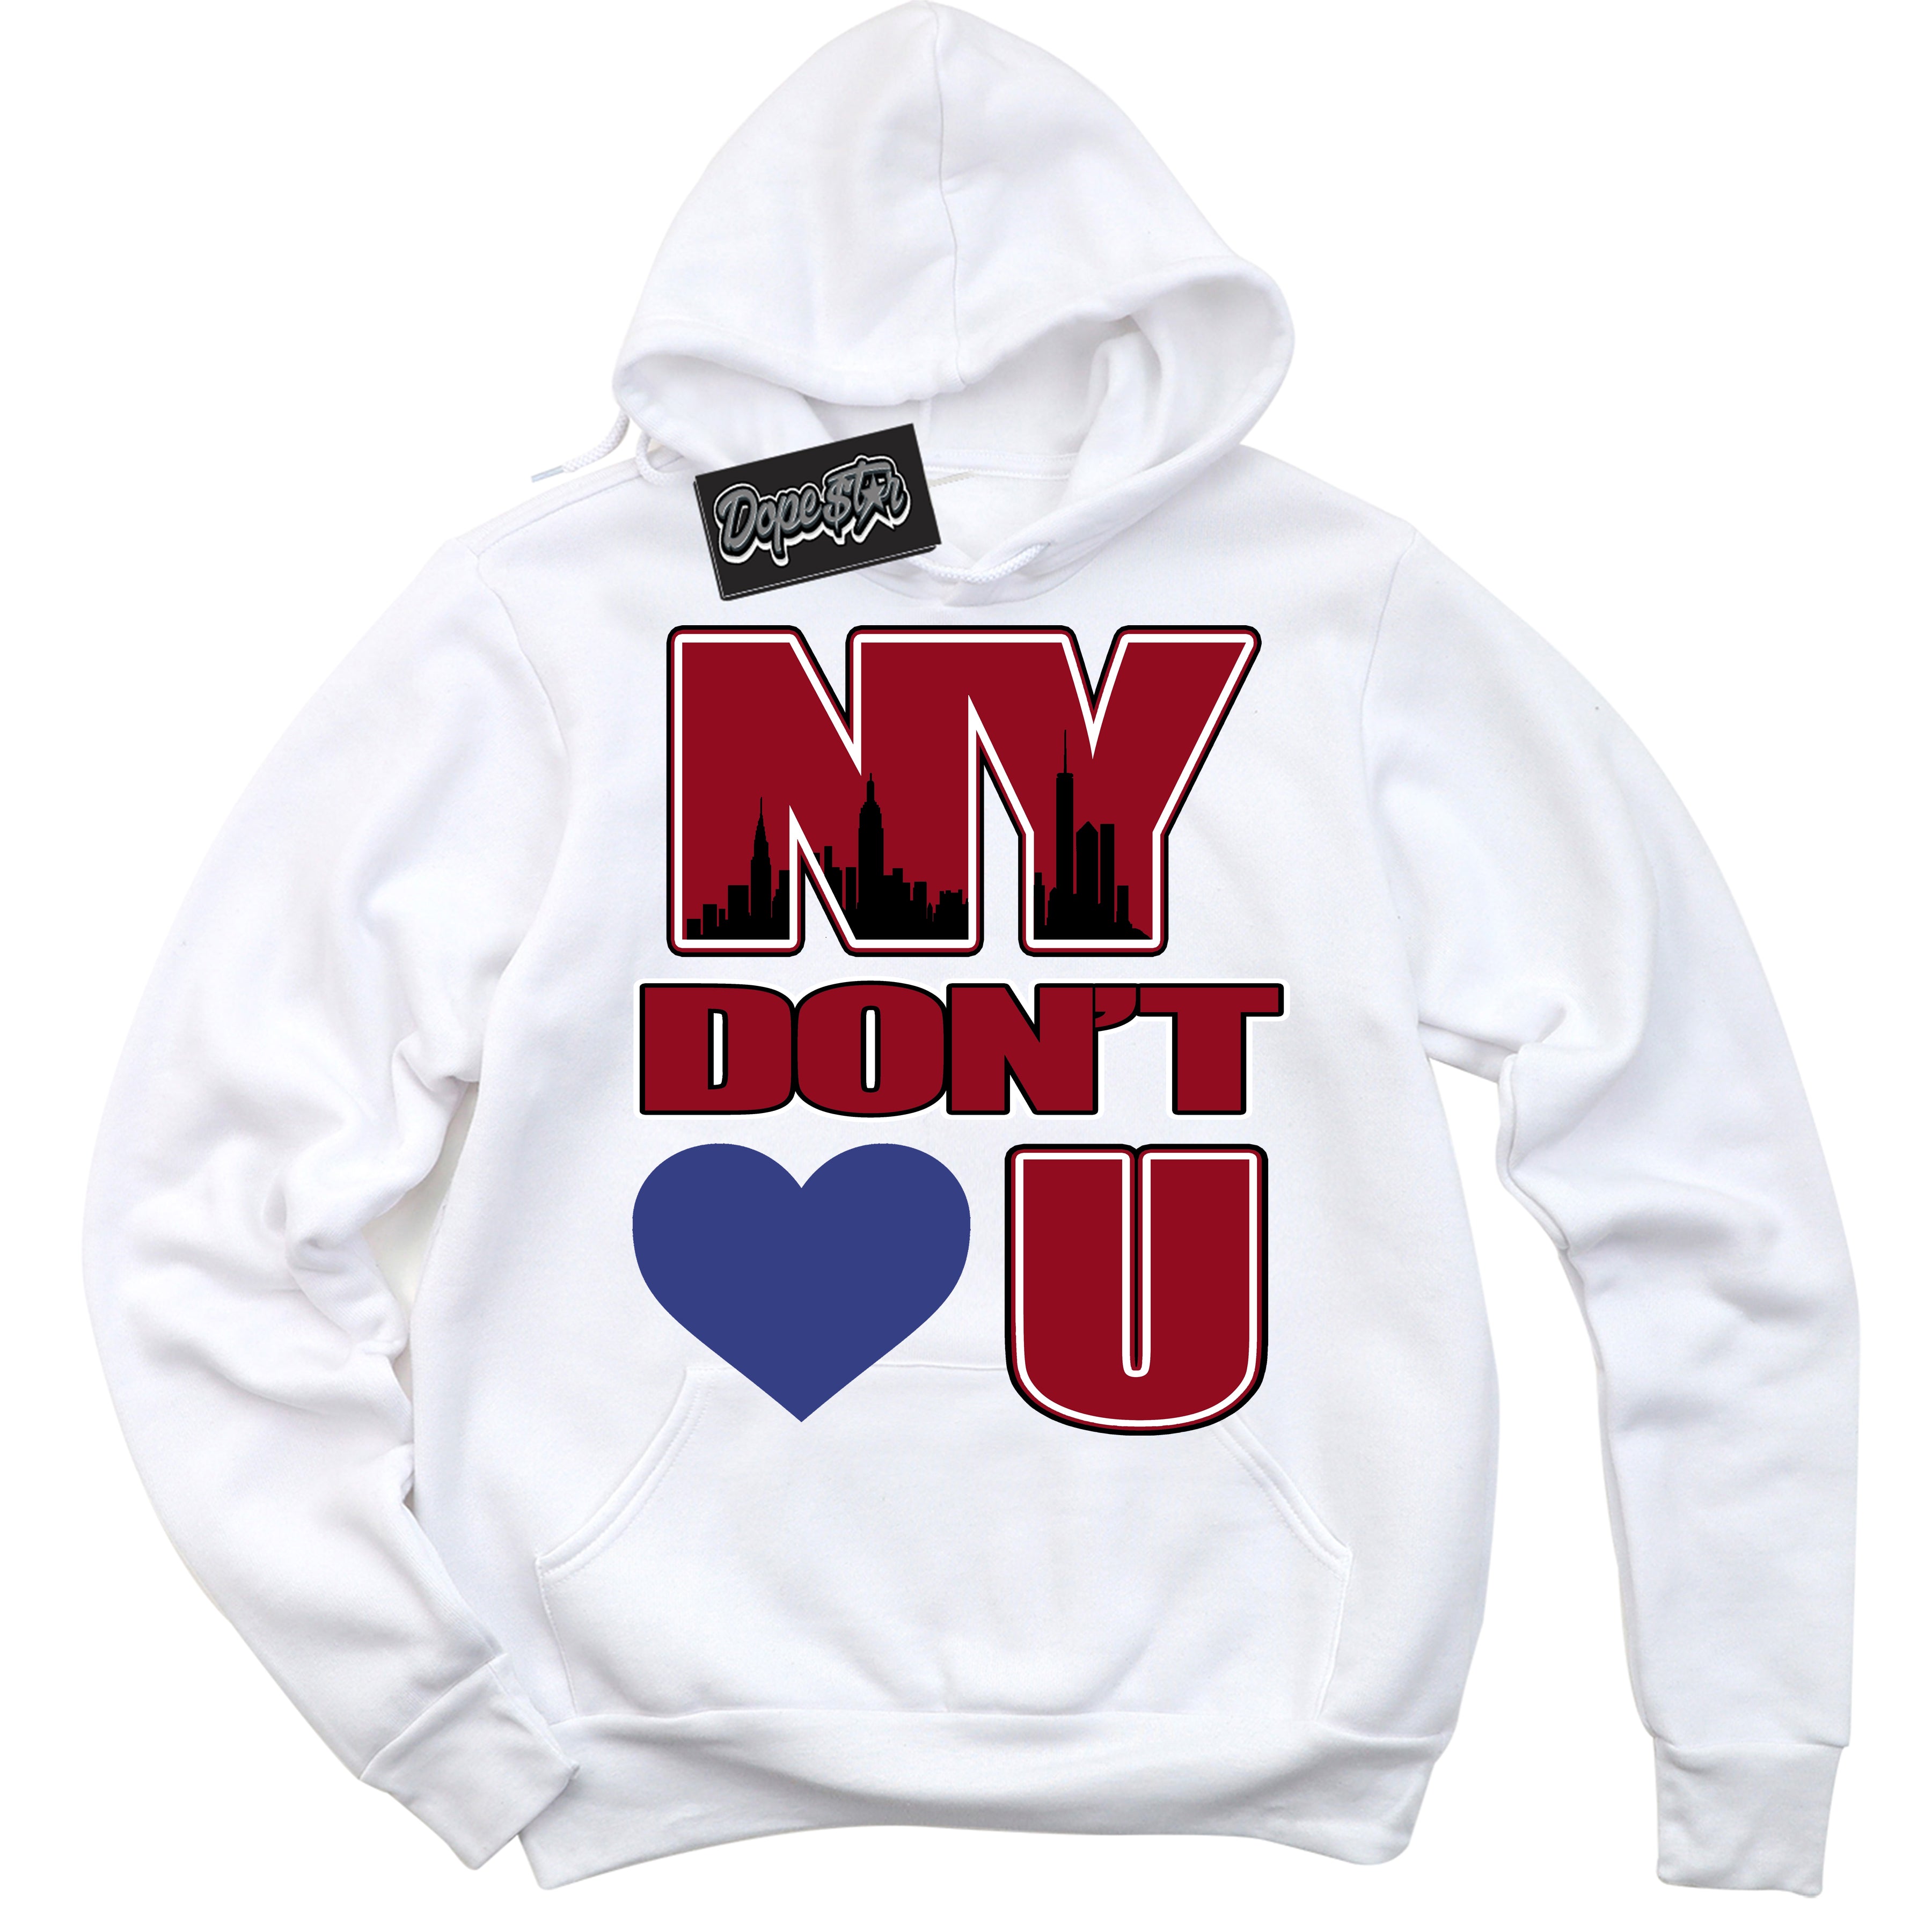 Cool White Hoodie with “ NY Don't Love You ”  design that Perfectly Matches Playoffs 8s Sneakers.